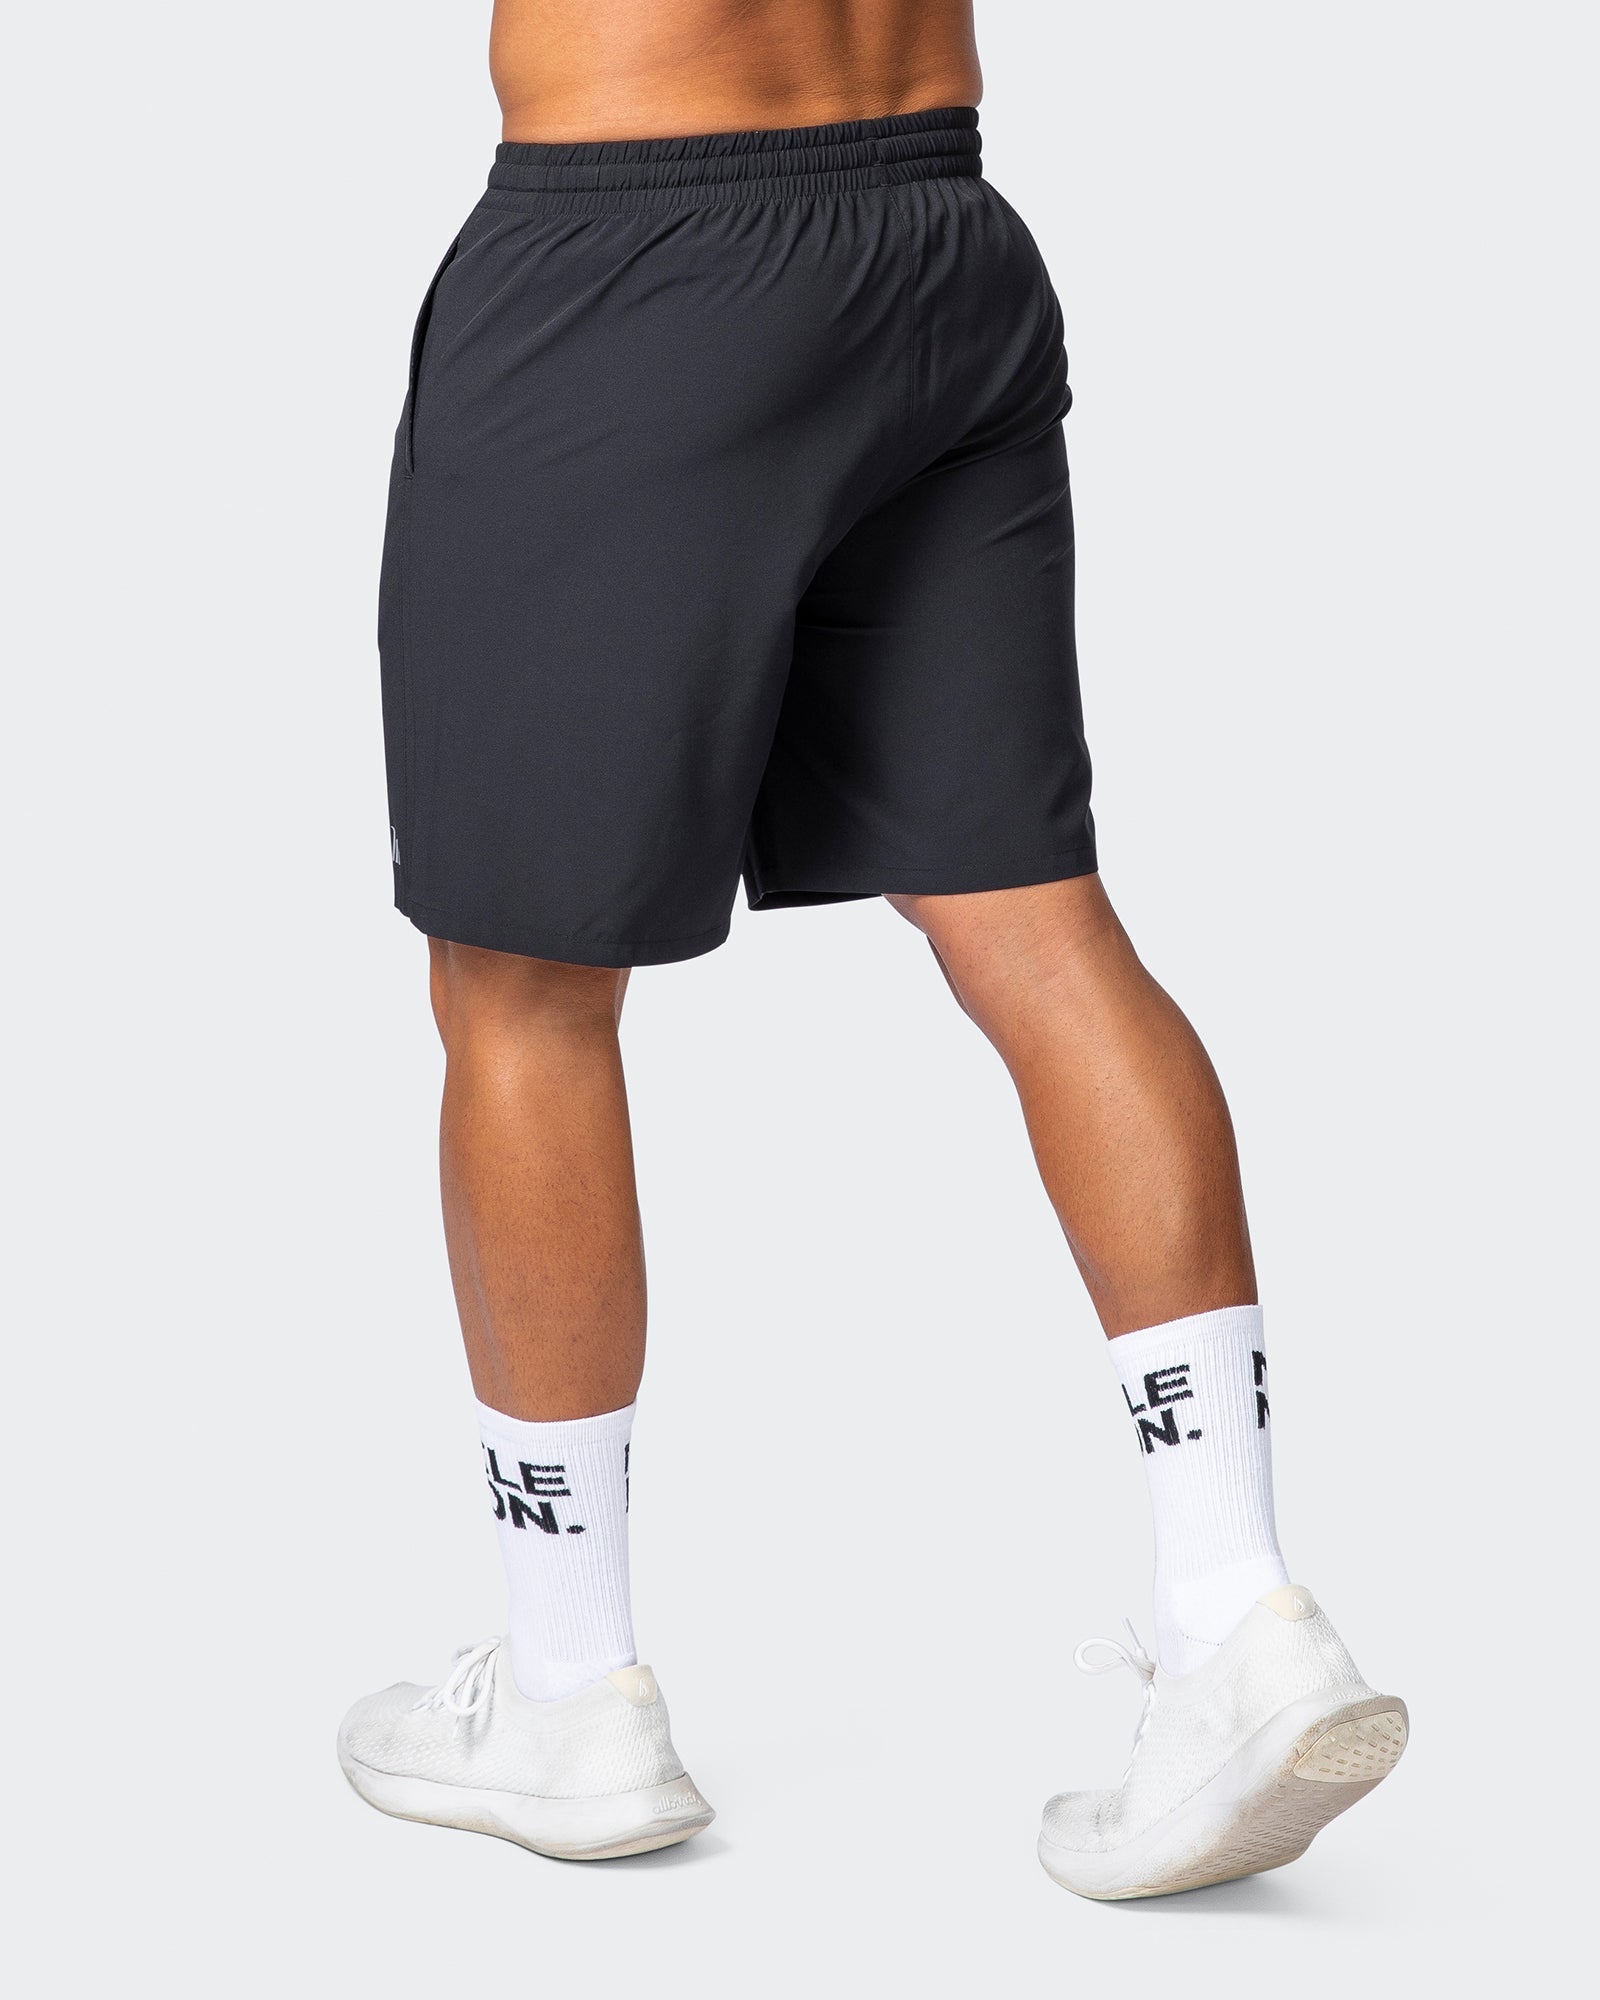 musclenation NEW HEIGHTS 7" SHORTS Black